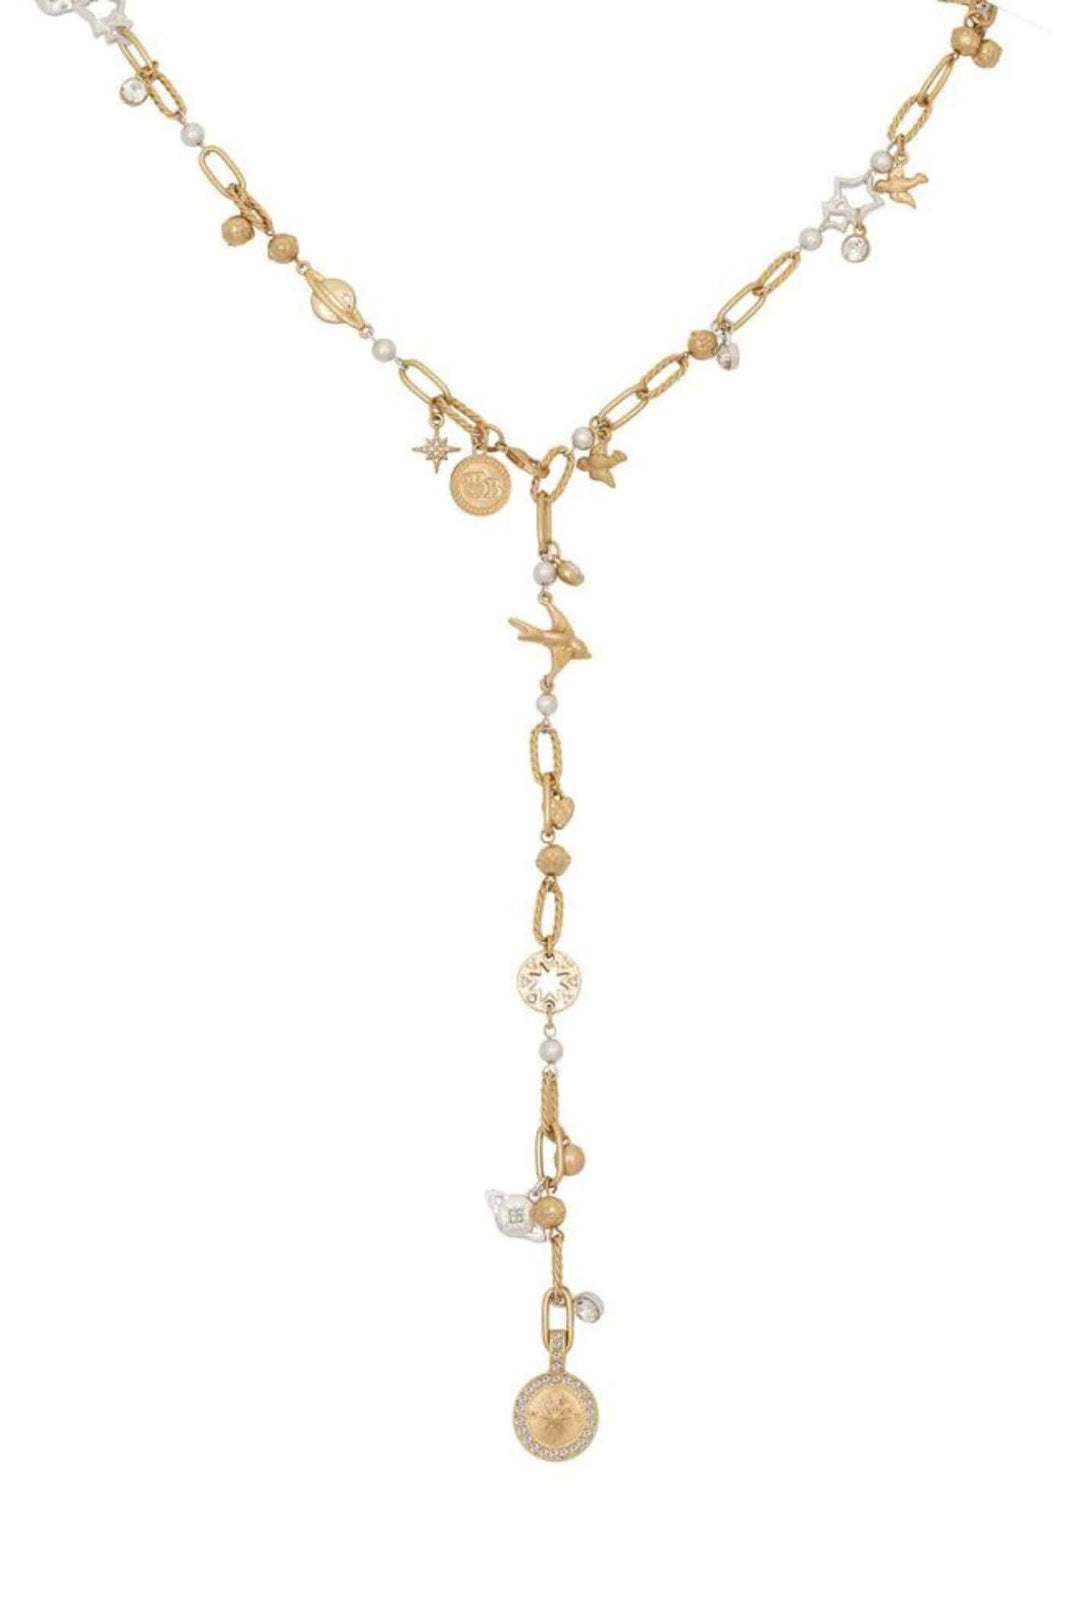 Bibi Bijoux Gold & Silver In The Sky Lariat Necklace